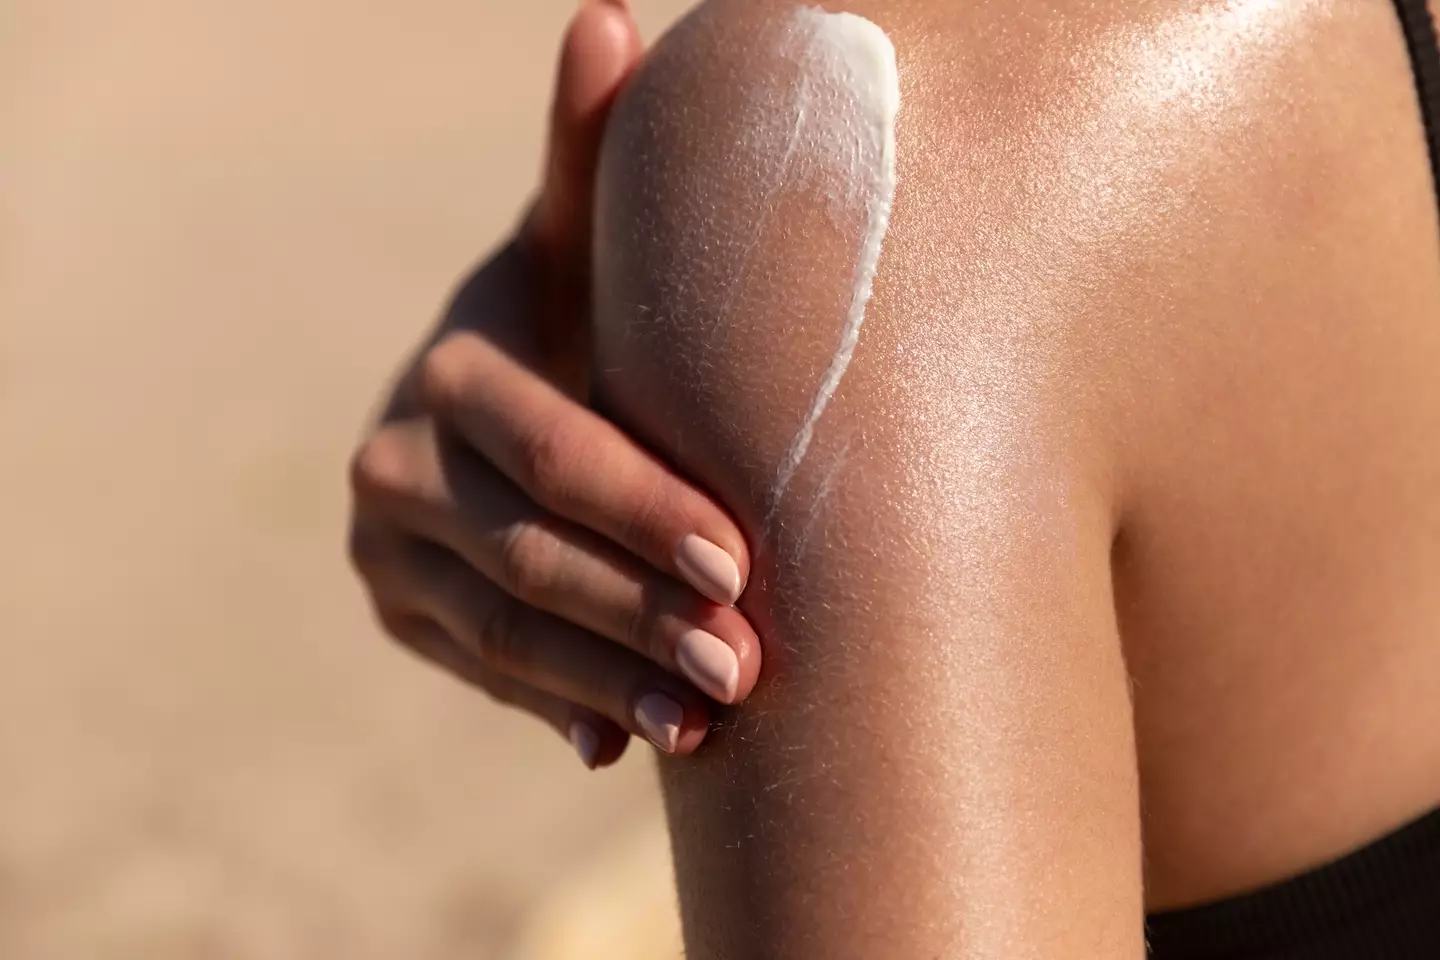 Brits are being warned to make sure they're applying suncream effectively.